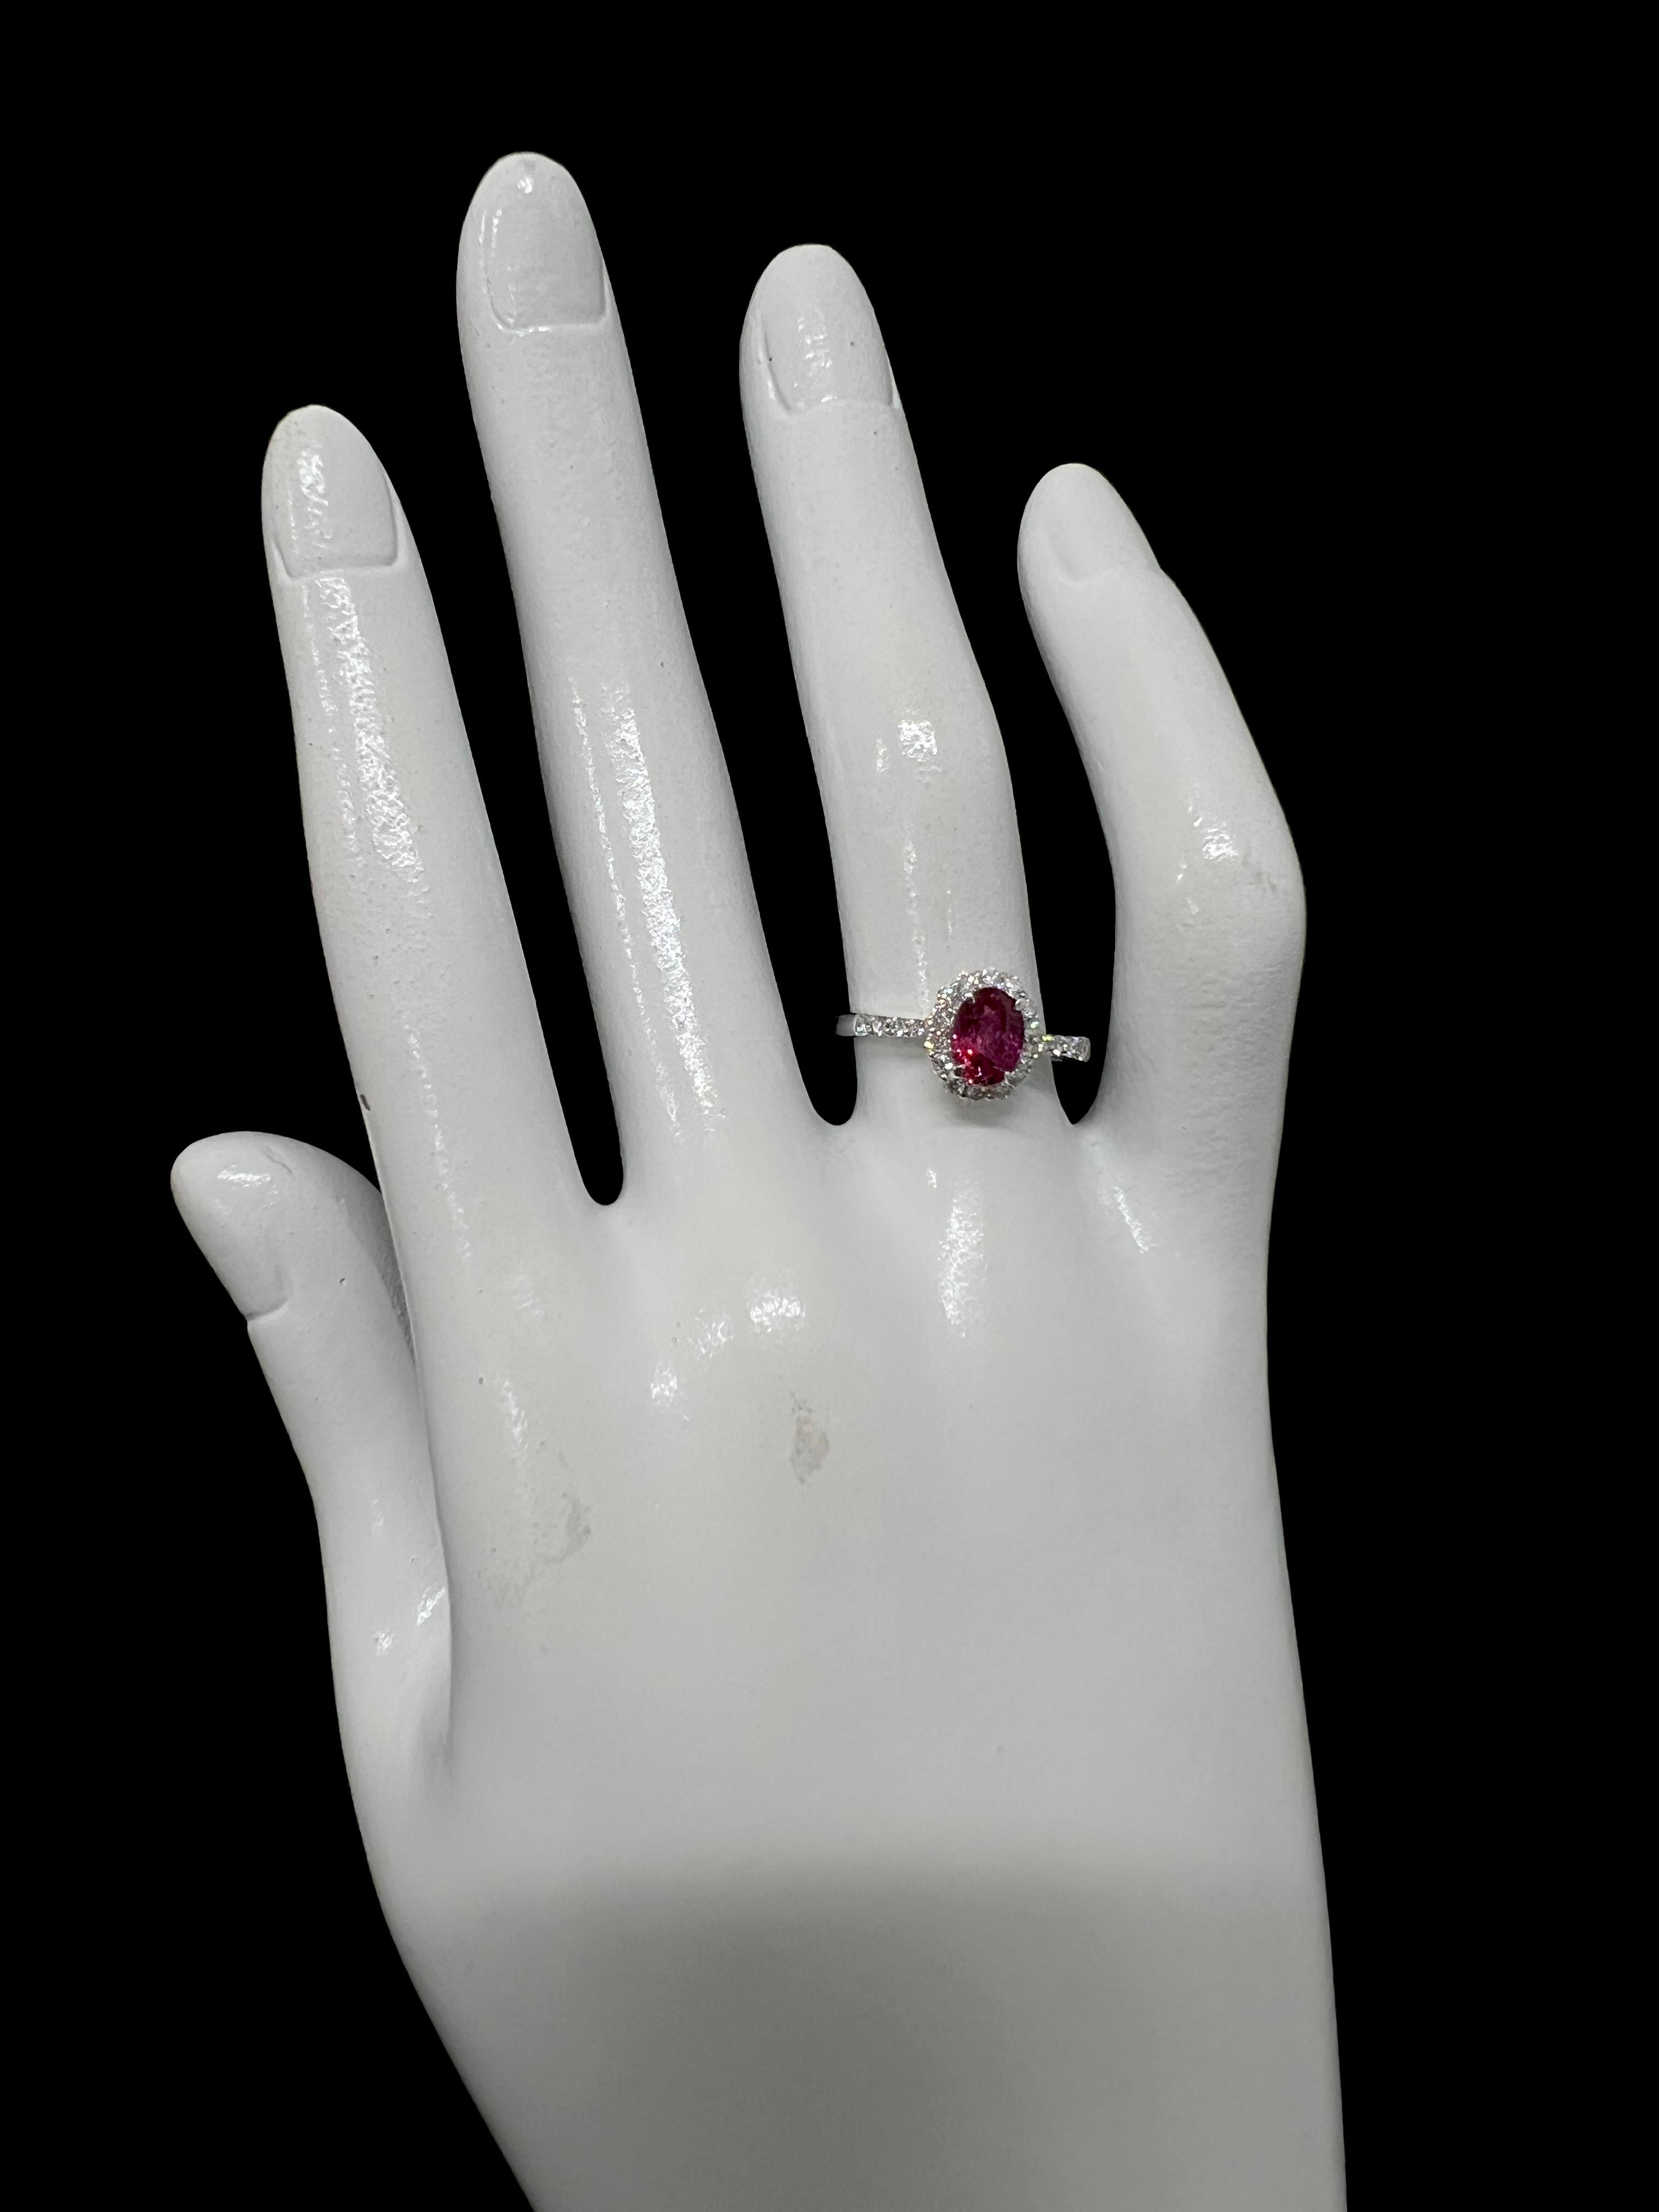 GIA Certified 1.07 Carat Untreated Ruby & Diamond Cocktail Ring Made in Platinum For Sale 1